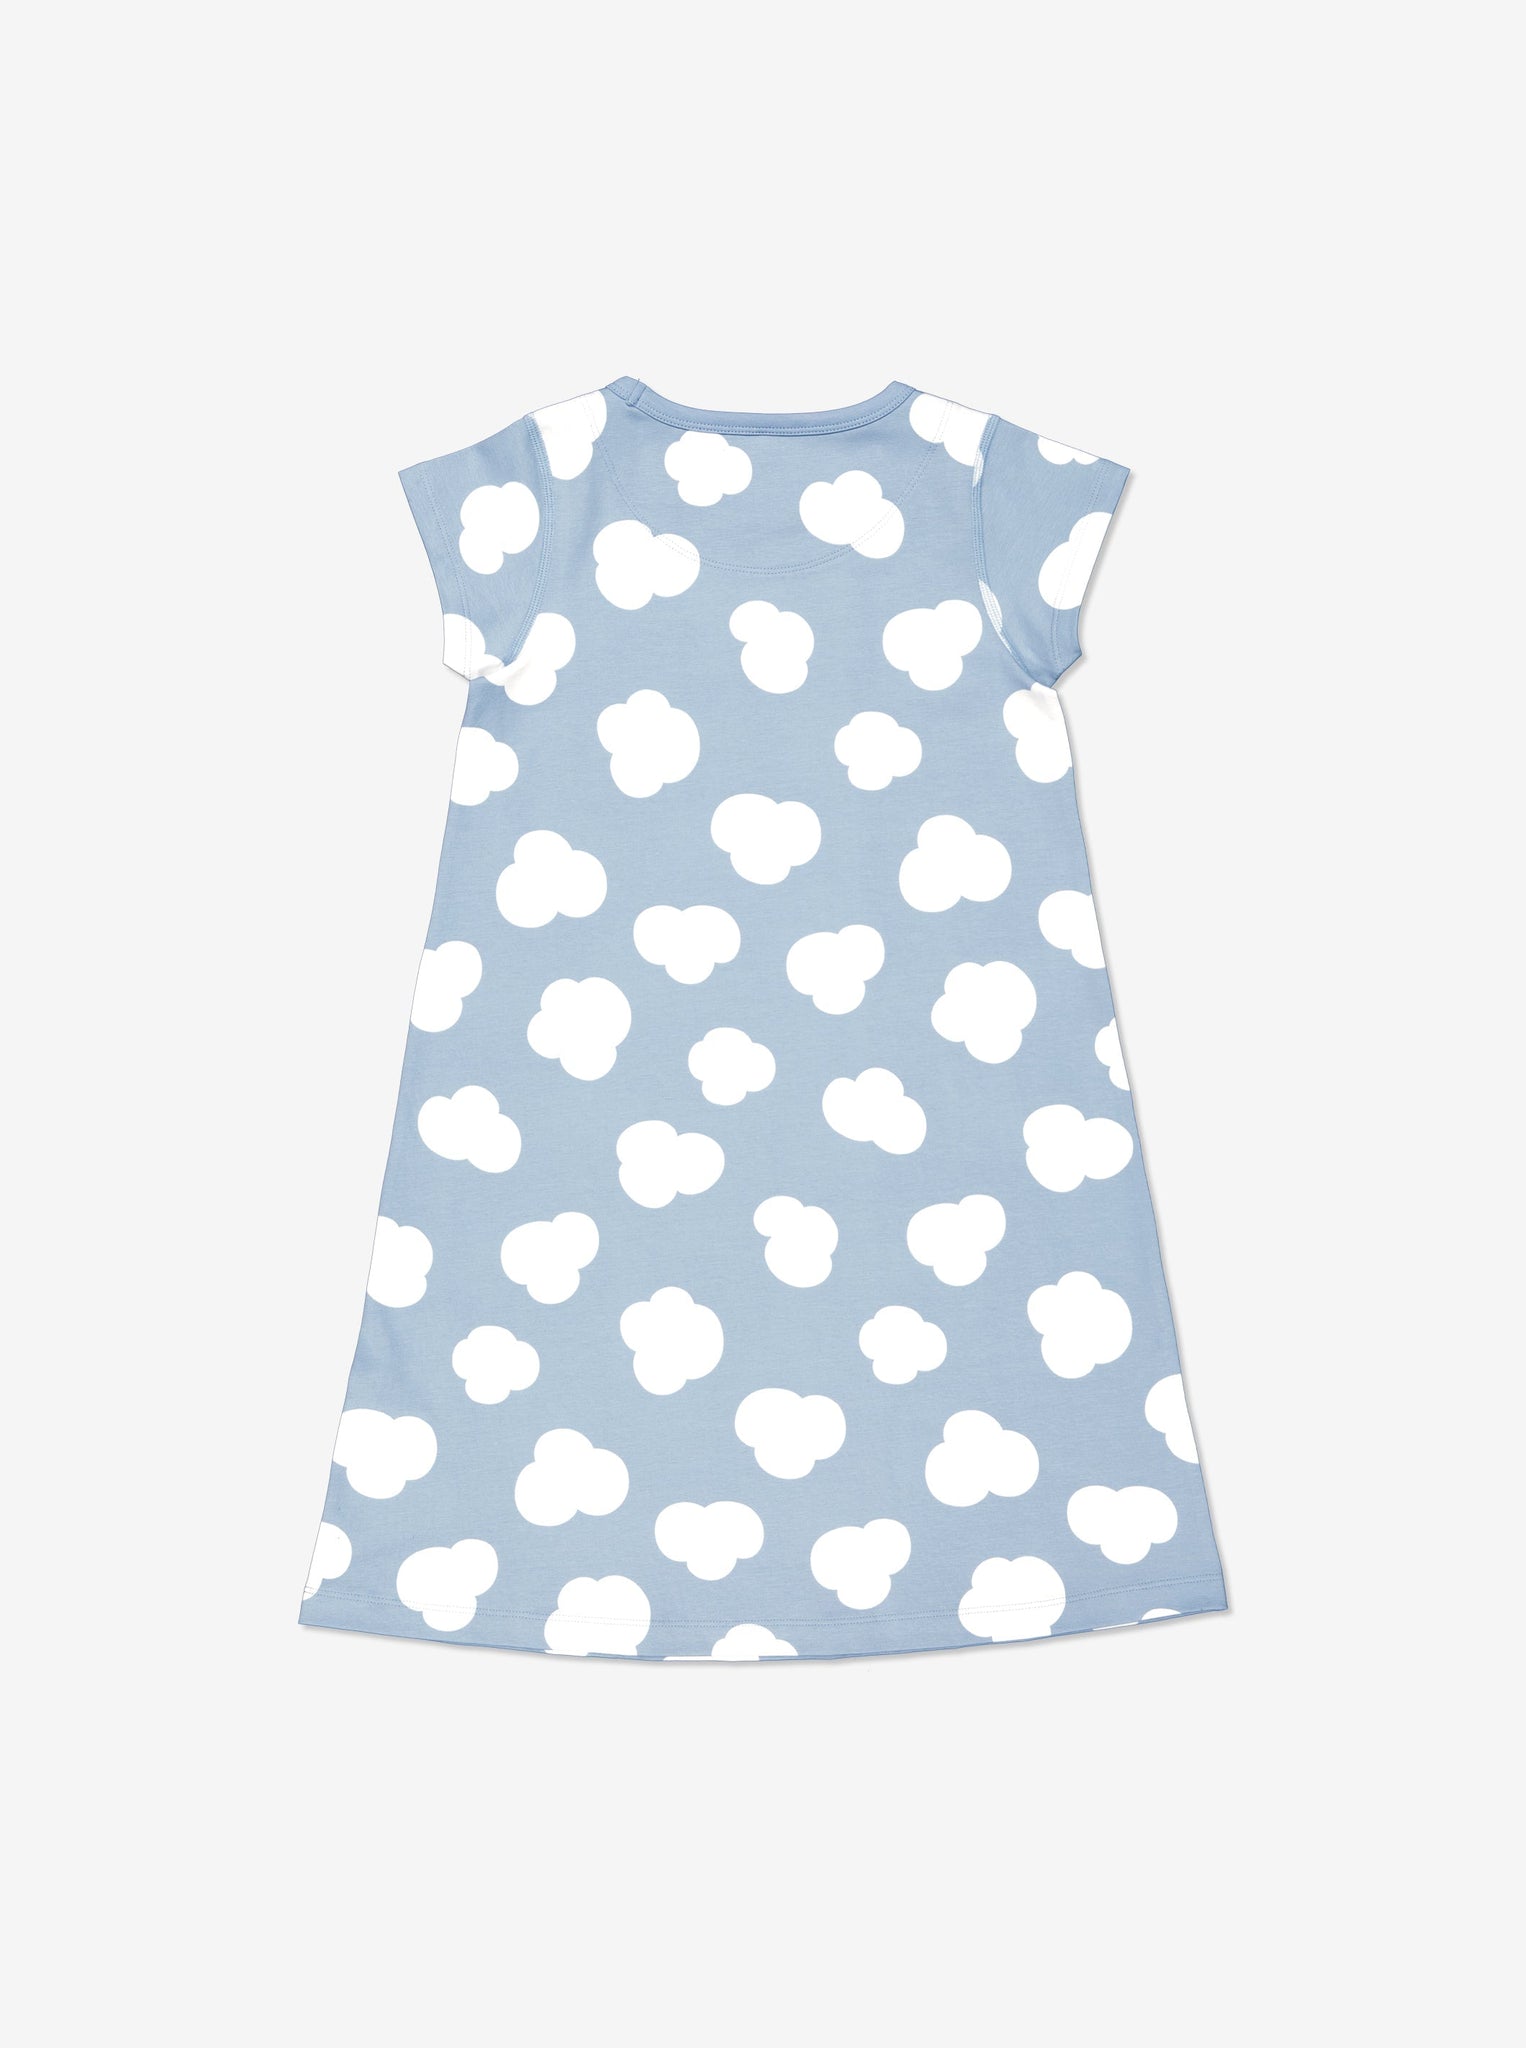  Cotton Cloud Print Kids Nightdress from Polarn O. Pyret Kidswear. Made using sustainable materials.